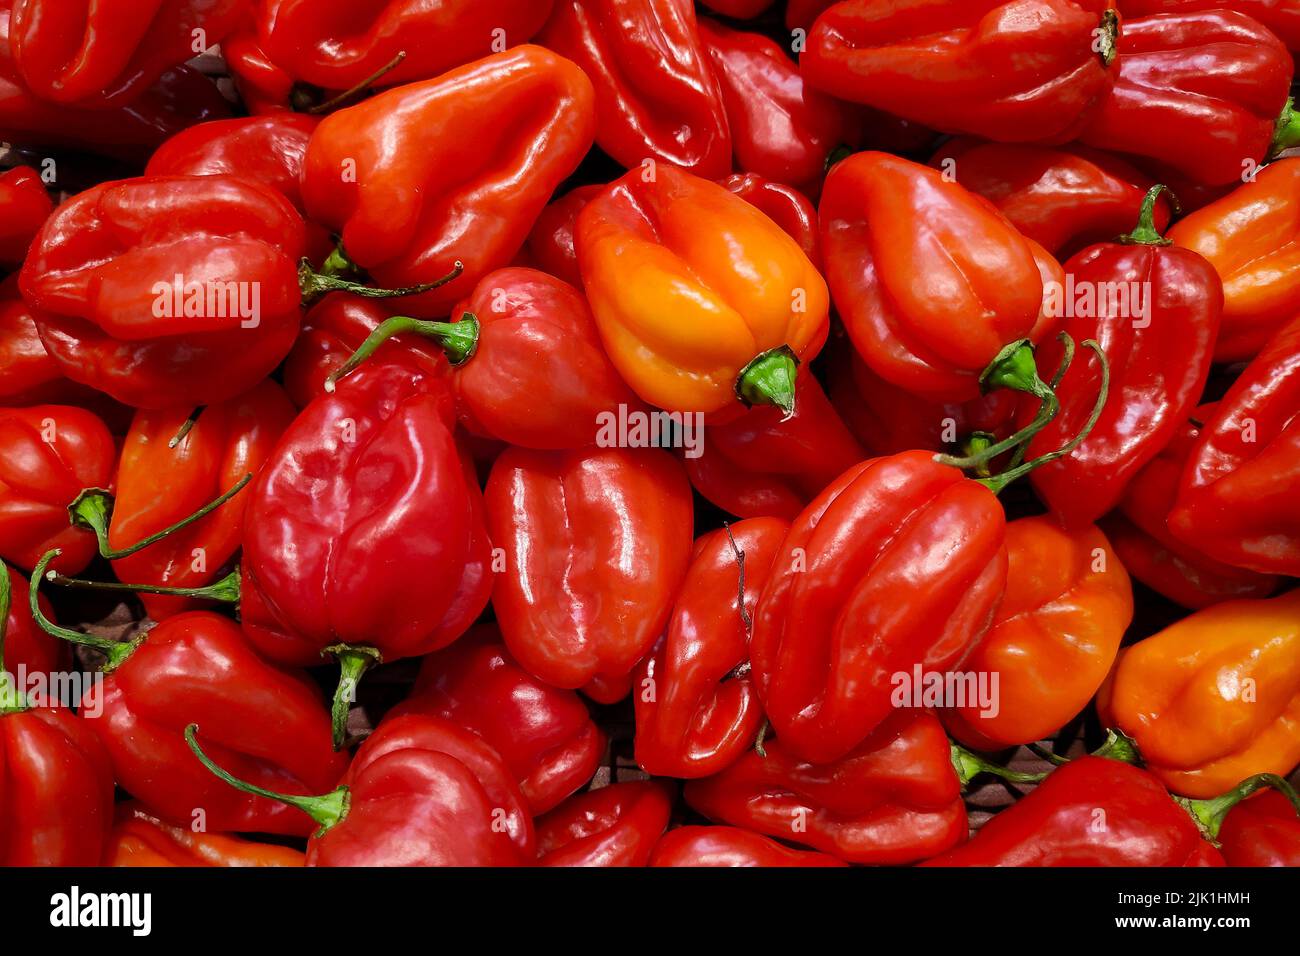 Stack of red habanero chilis (Capsicum chinense) on a market stall. Stock Photo